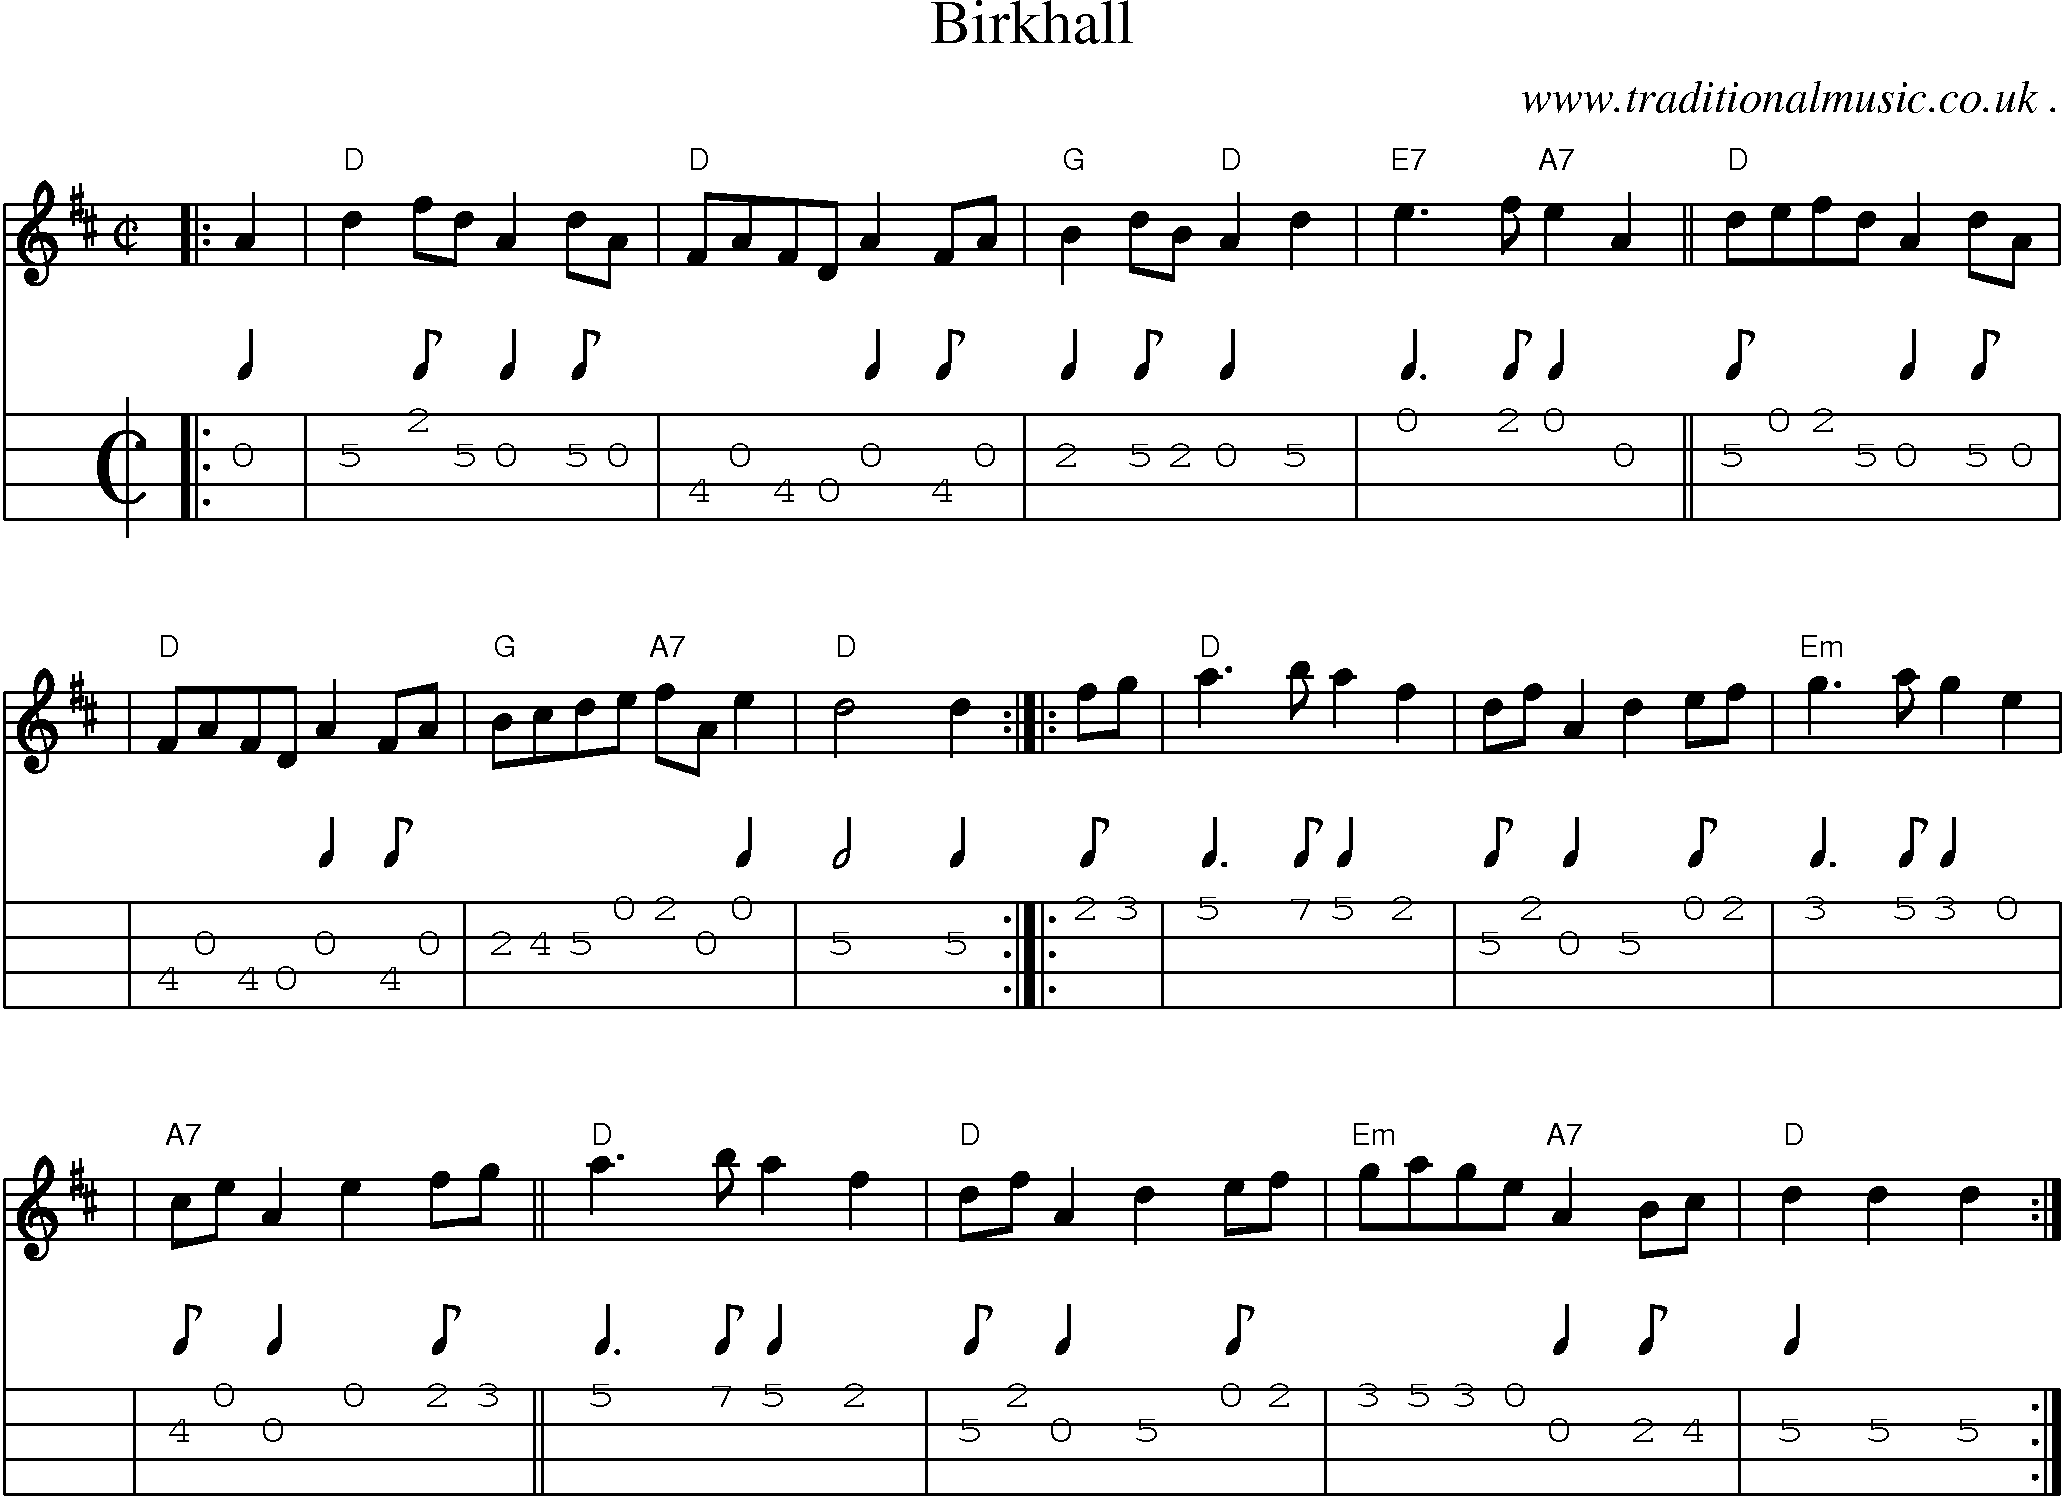 Sheet-music  score, Chords and Mandolin Tabs for Birkhall